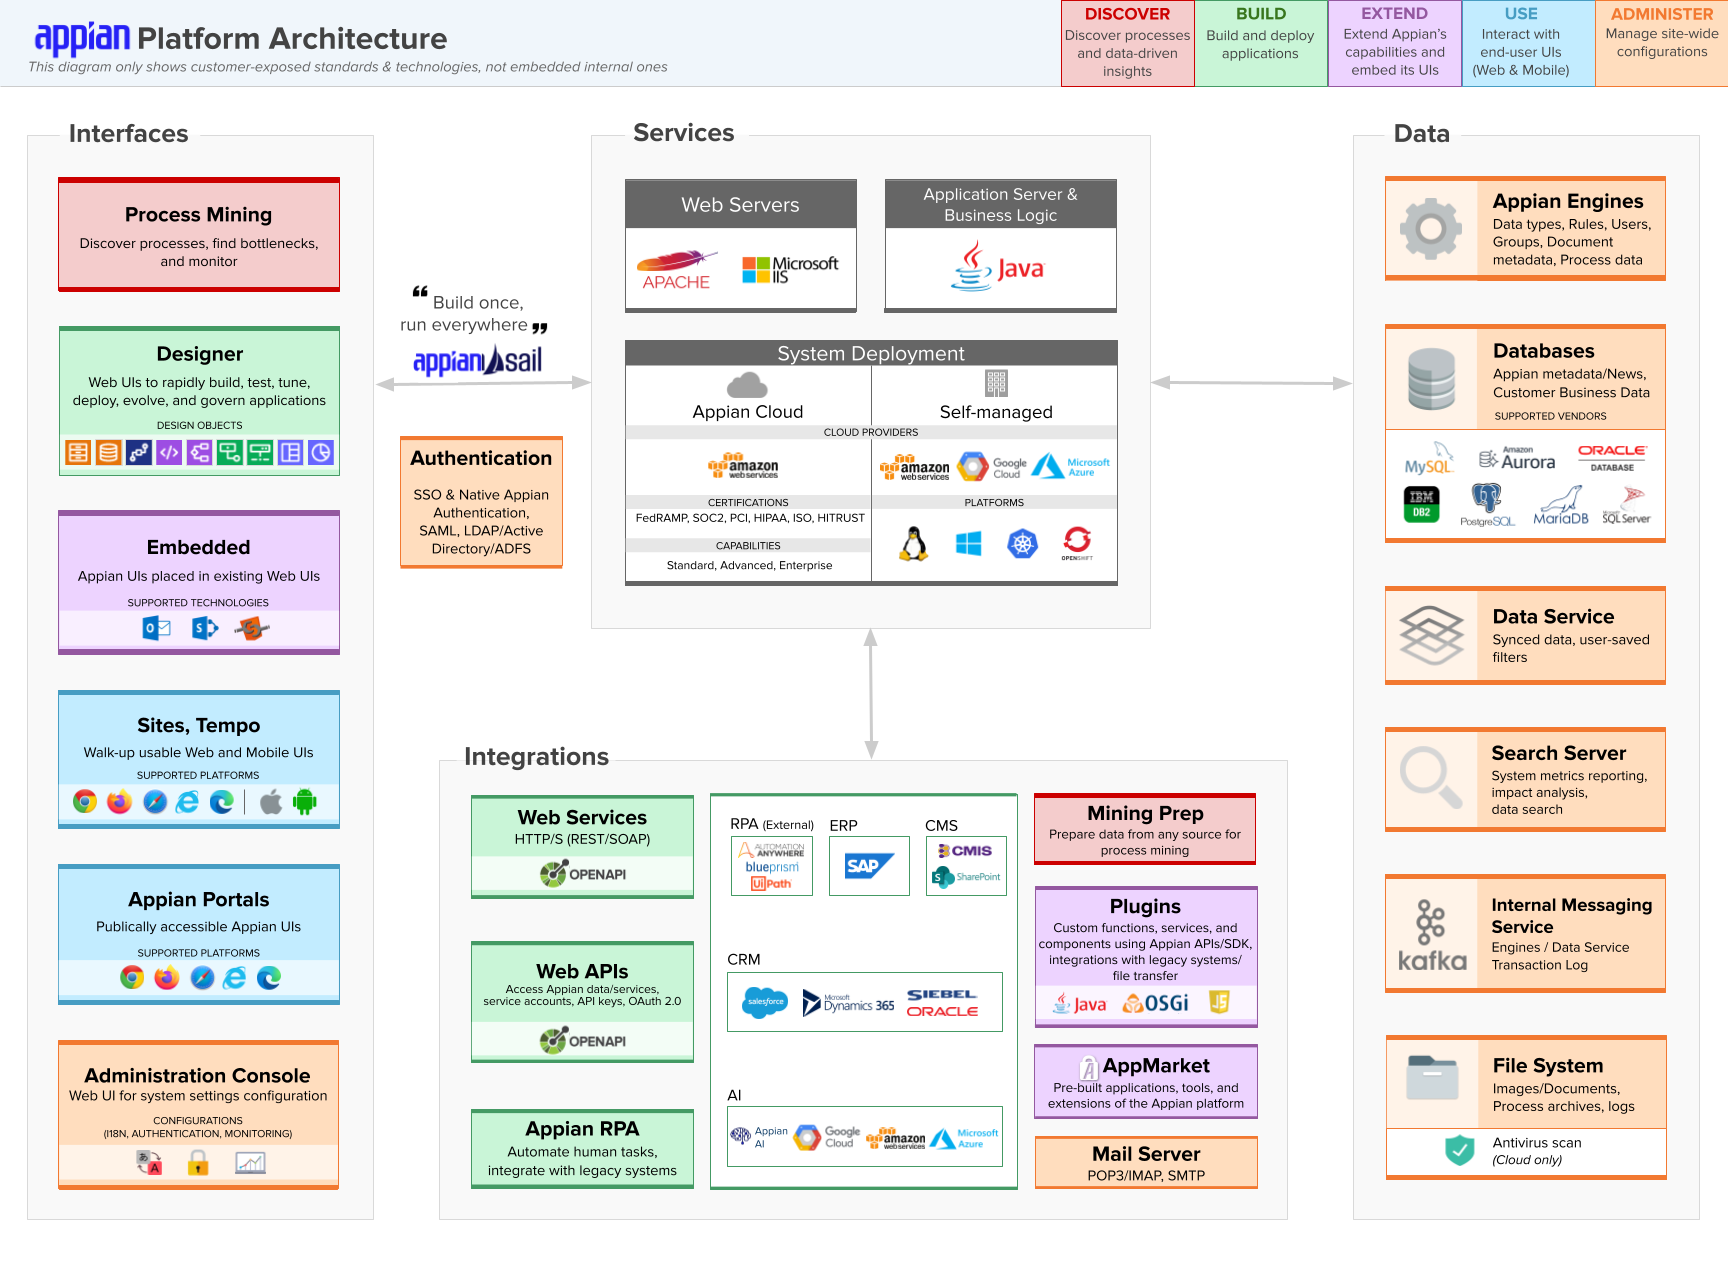 images/How_Appian_Works/enterprise_architecture_overview.png